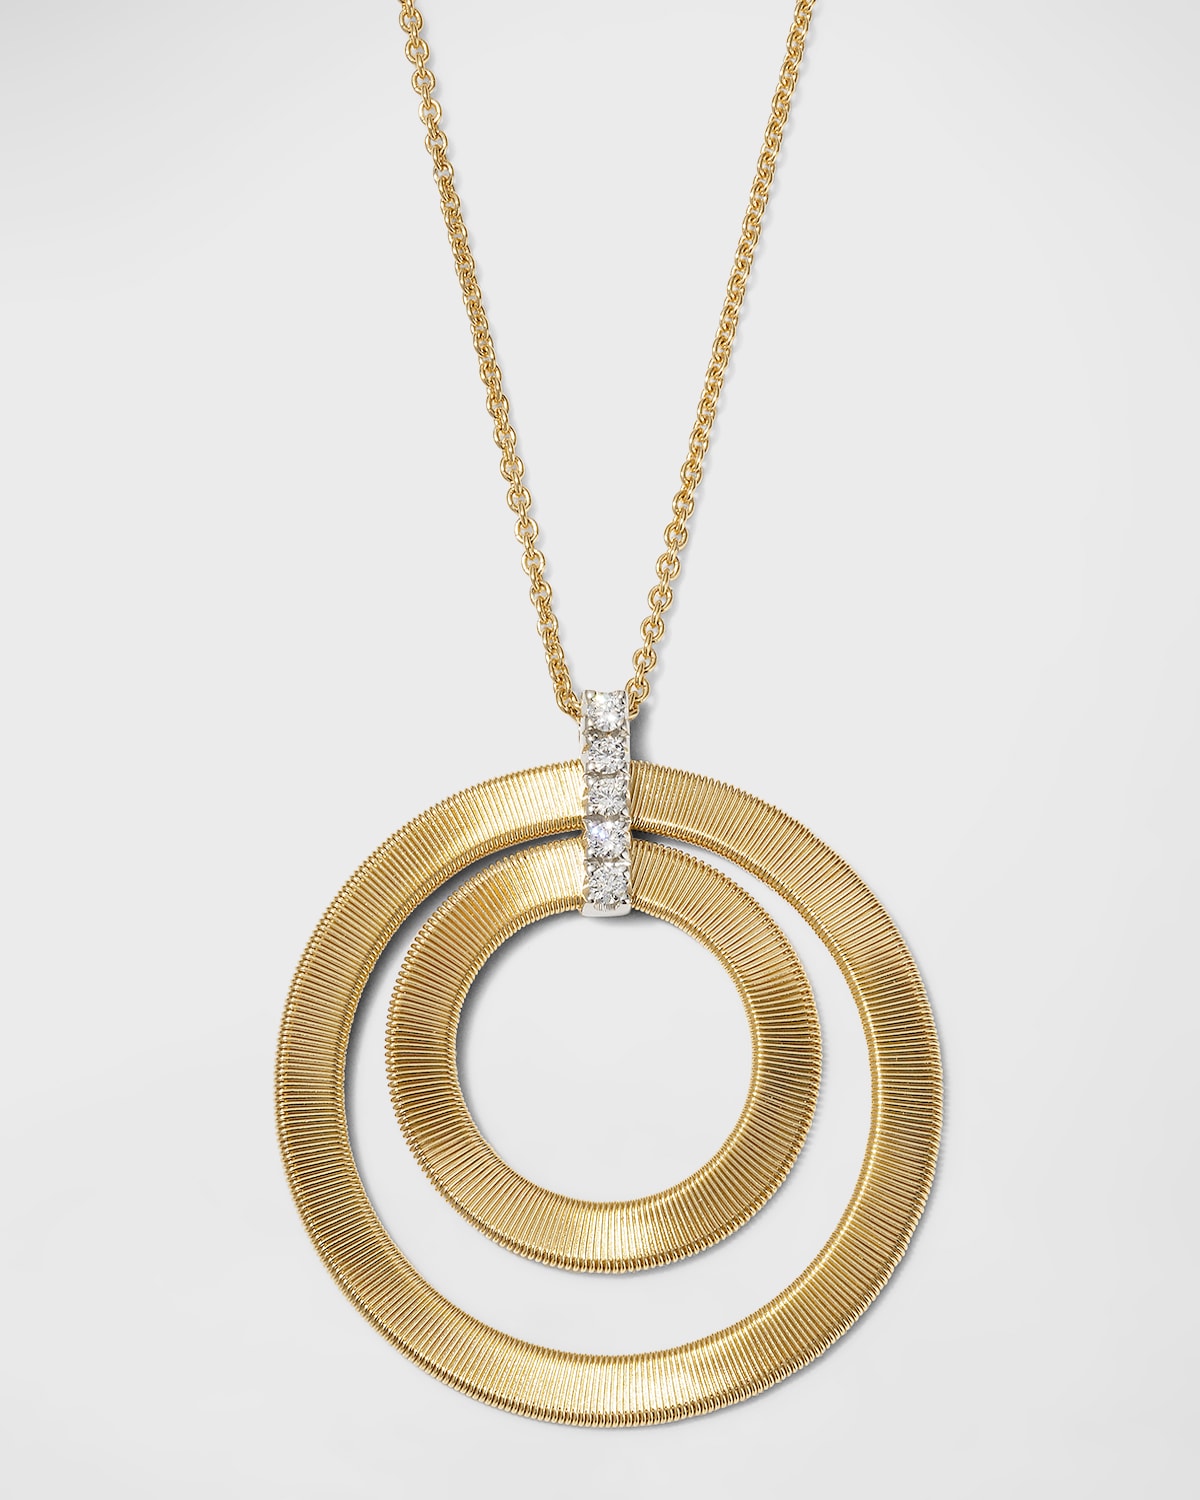 Marco Bicego 18k Gold Masai Concentric Circle Pendant With Diamonds In 05 Yellow Gold